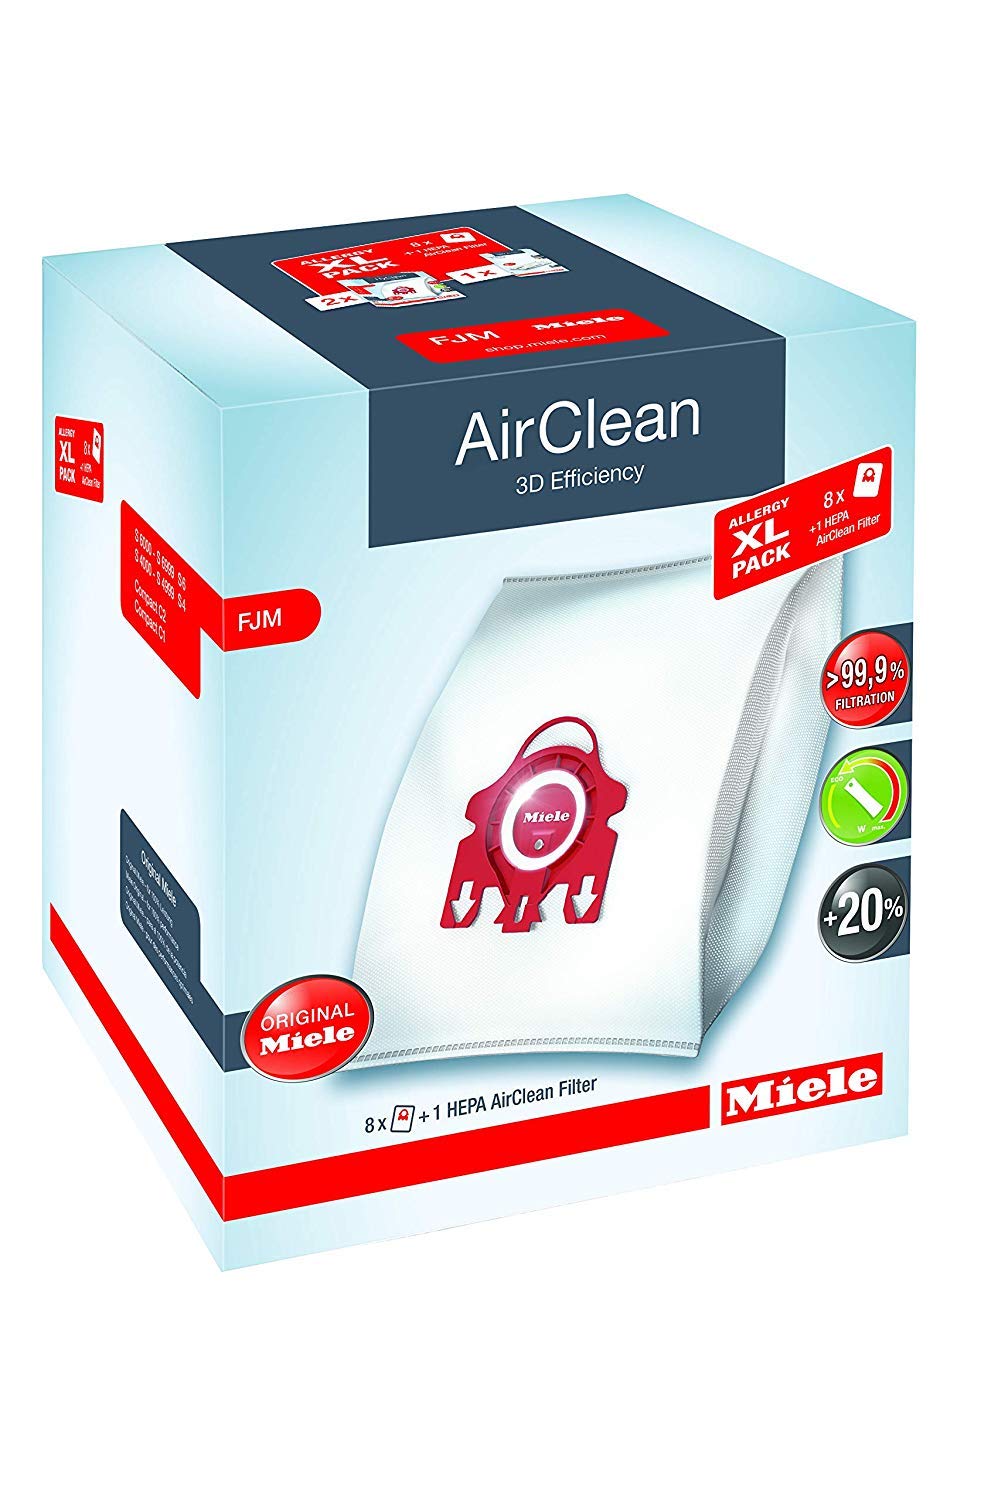 Miele XL Performance Pack AirClean 3D FJM Vacuum Cleaner Bags and HEPA Filter